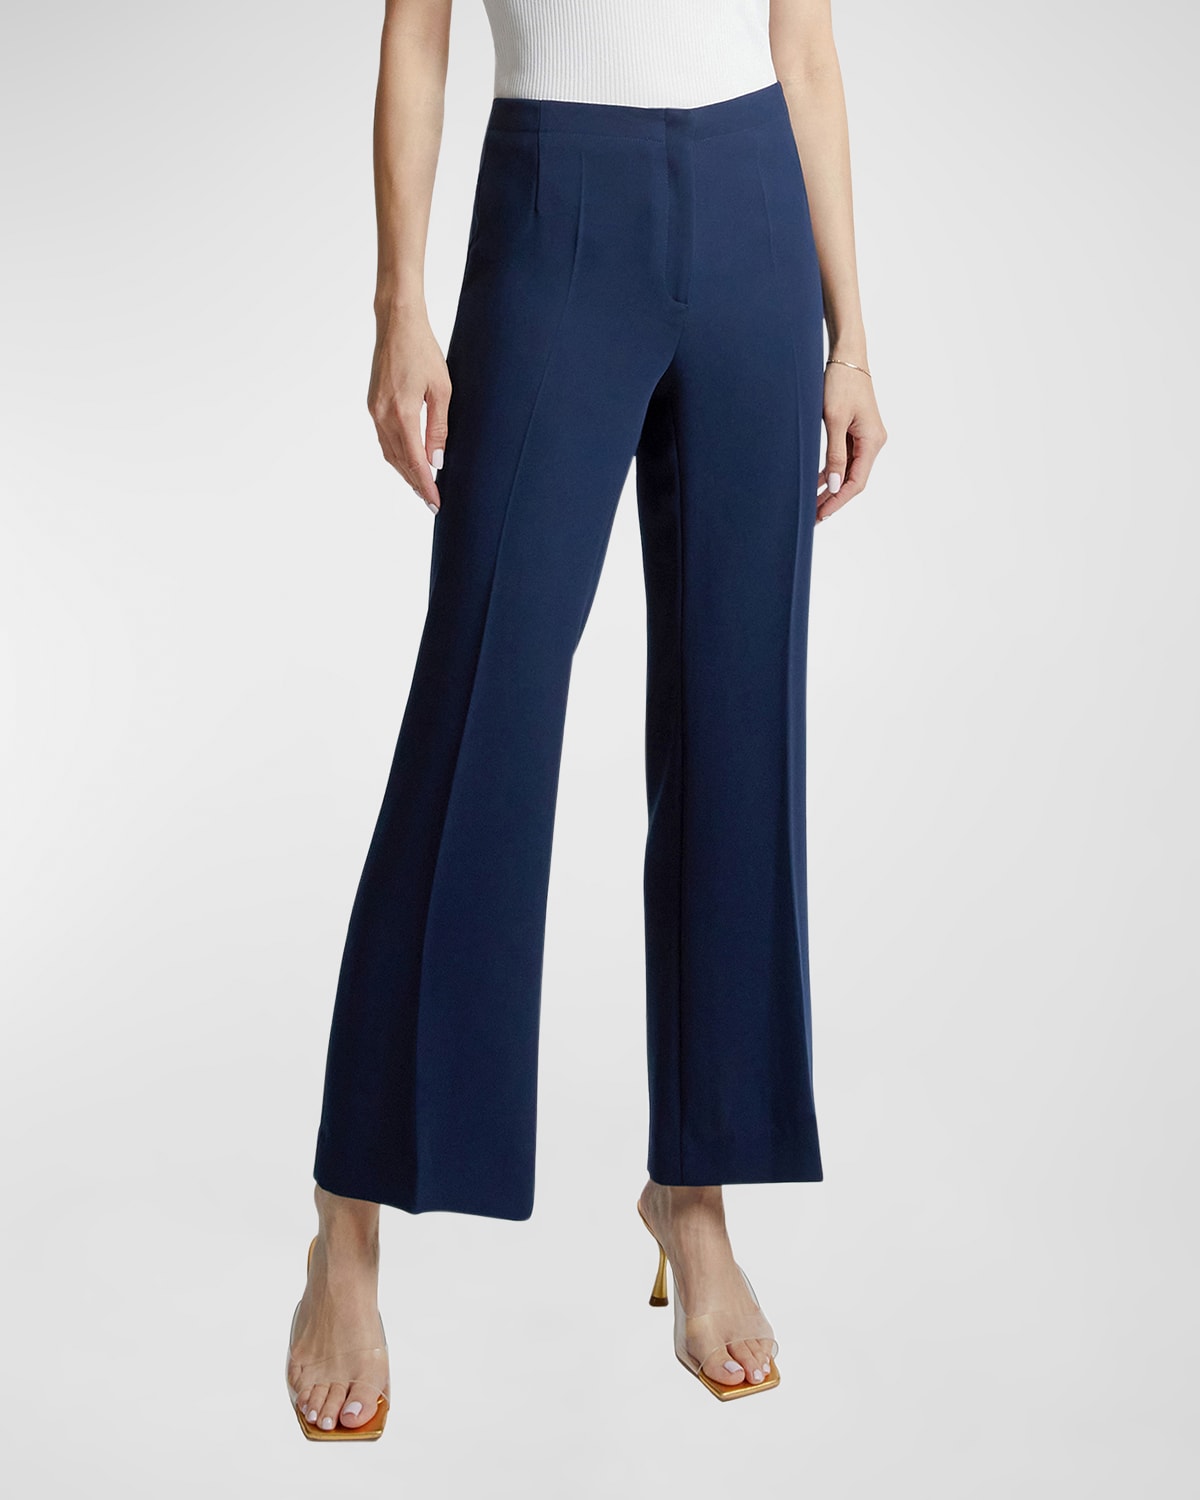 SANTORELLI IZZY CROPPED FLARE CADY PANTS